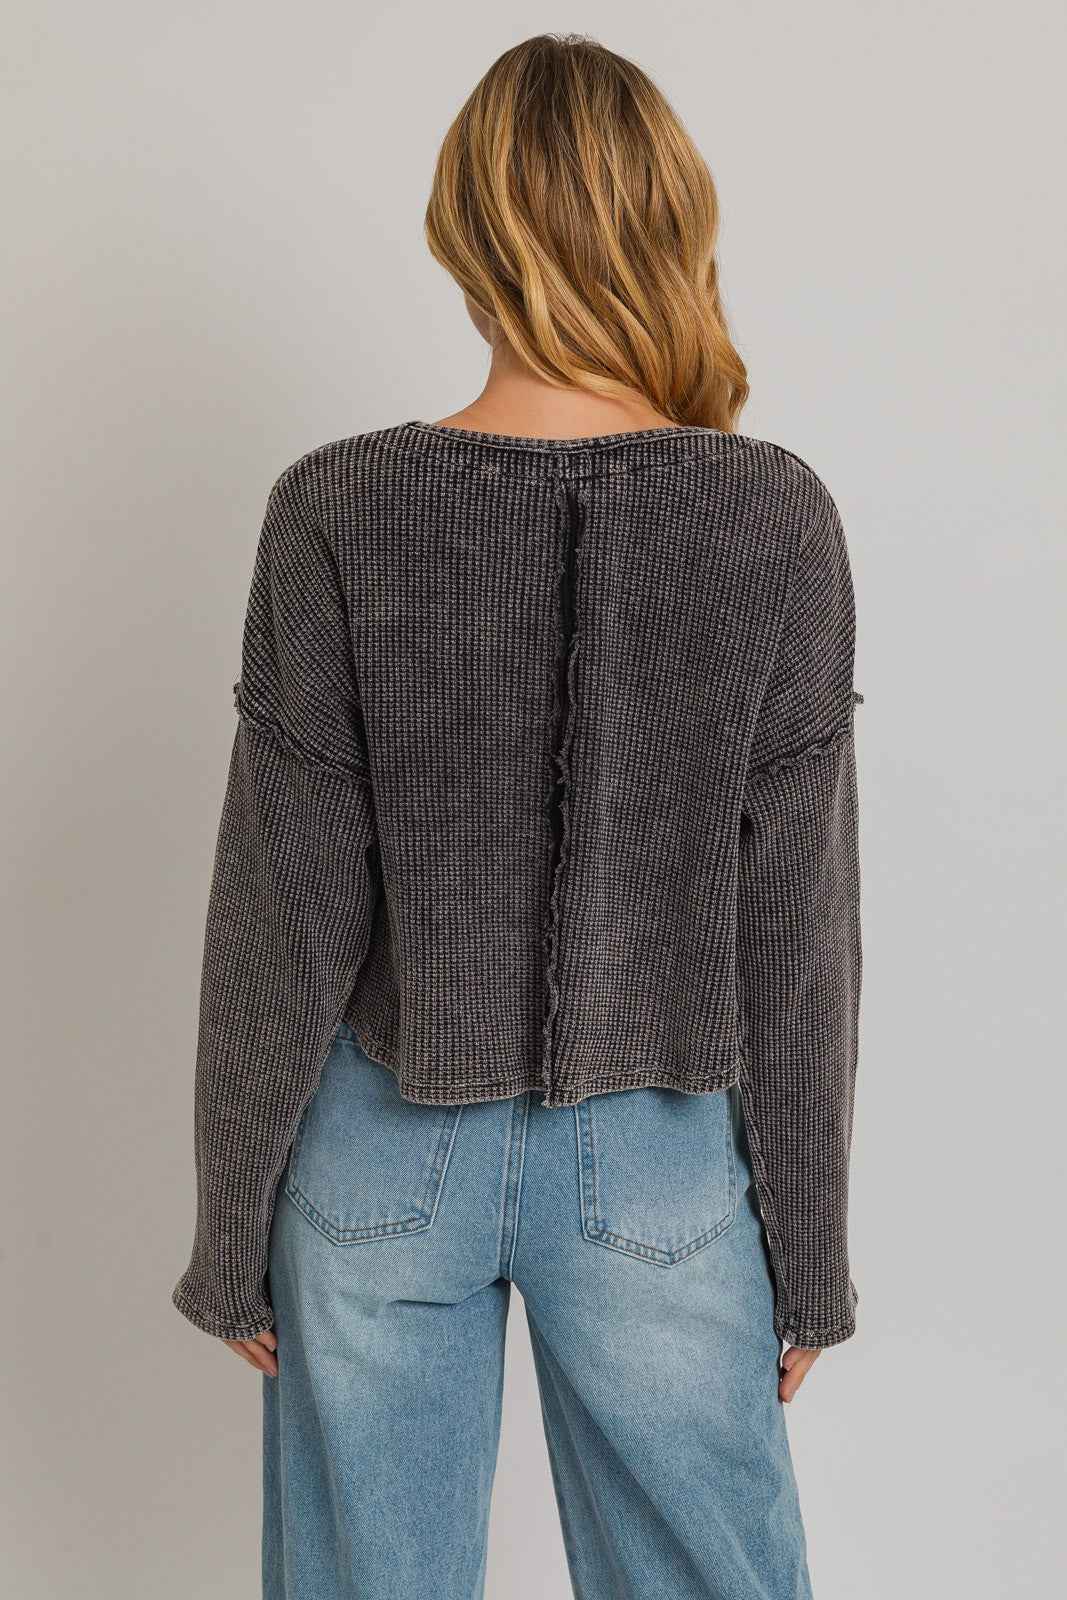 Le Lis | Charcoal Thermal Knit Top | Sweetest Stitch Online Boutique